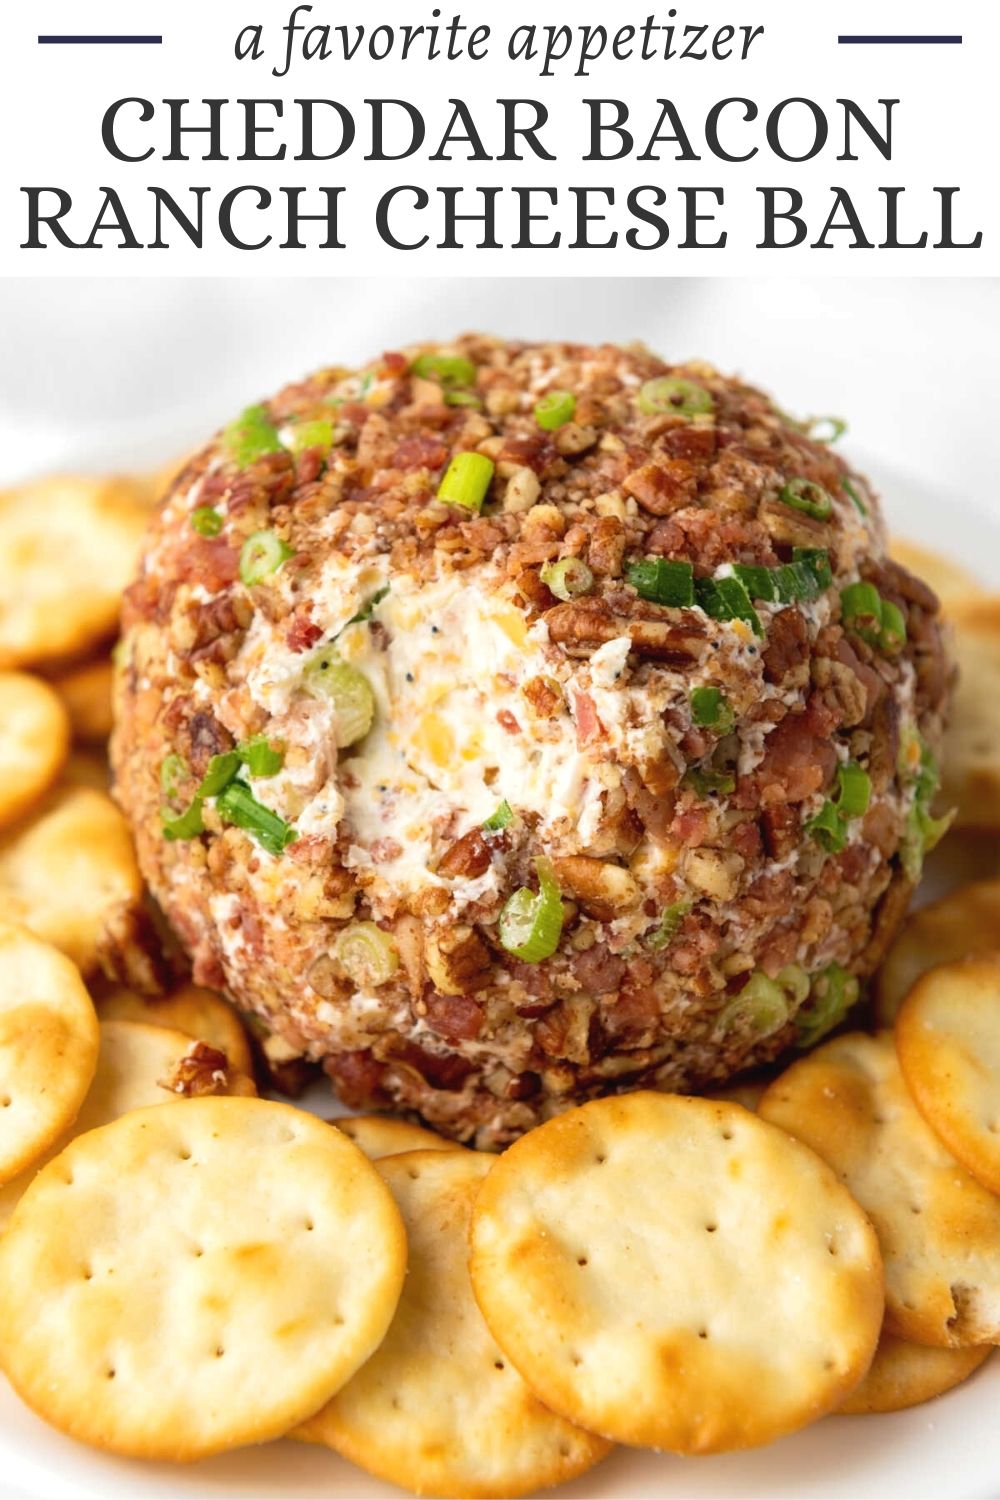 The savory flavors of cheddar, bacon and ranch are the perfect combination for an out of this world cheese ball. It is a perfect appetizer for any party. Cheese balls also transport well, so they are great for tailgating and potlucks too!